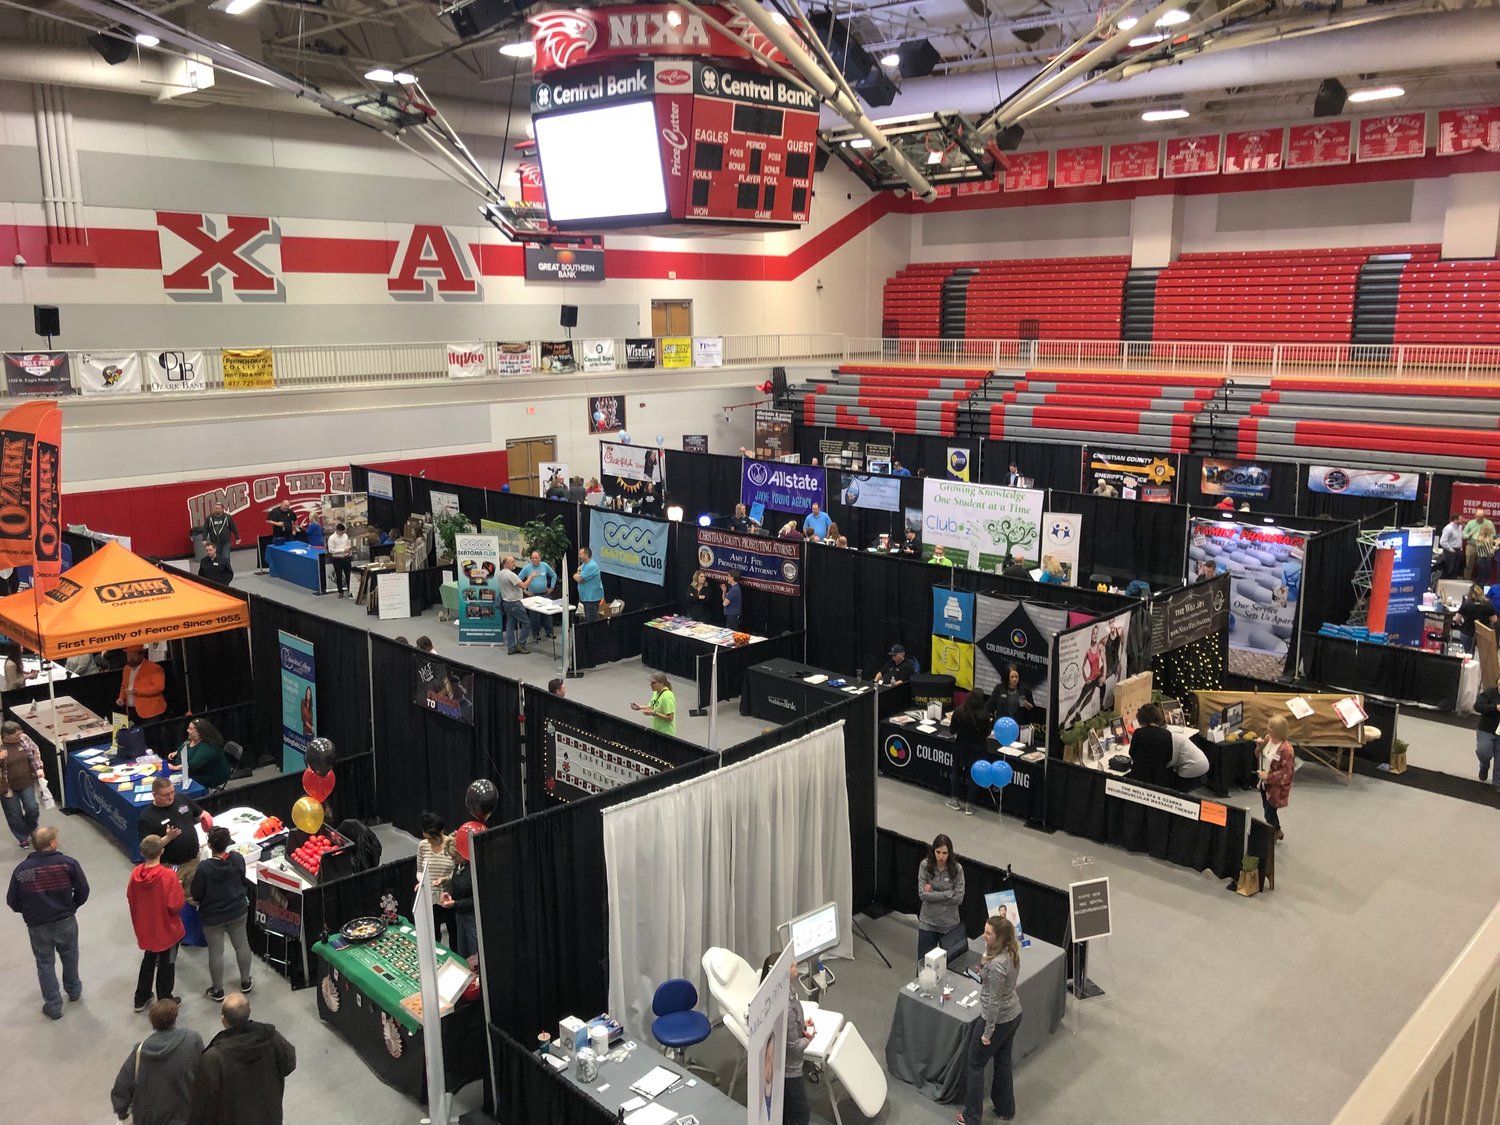 The Nixpo Business and Community Expo, last held in 2019, is set to return this month at Nixa High School.